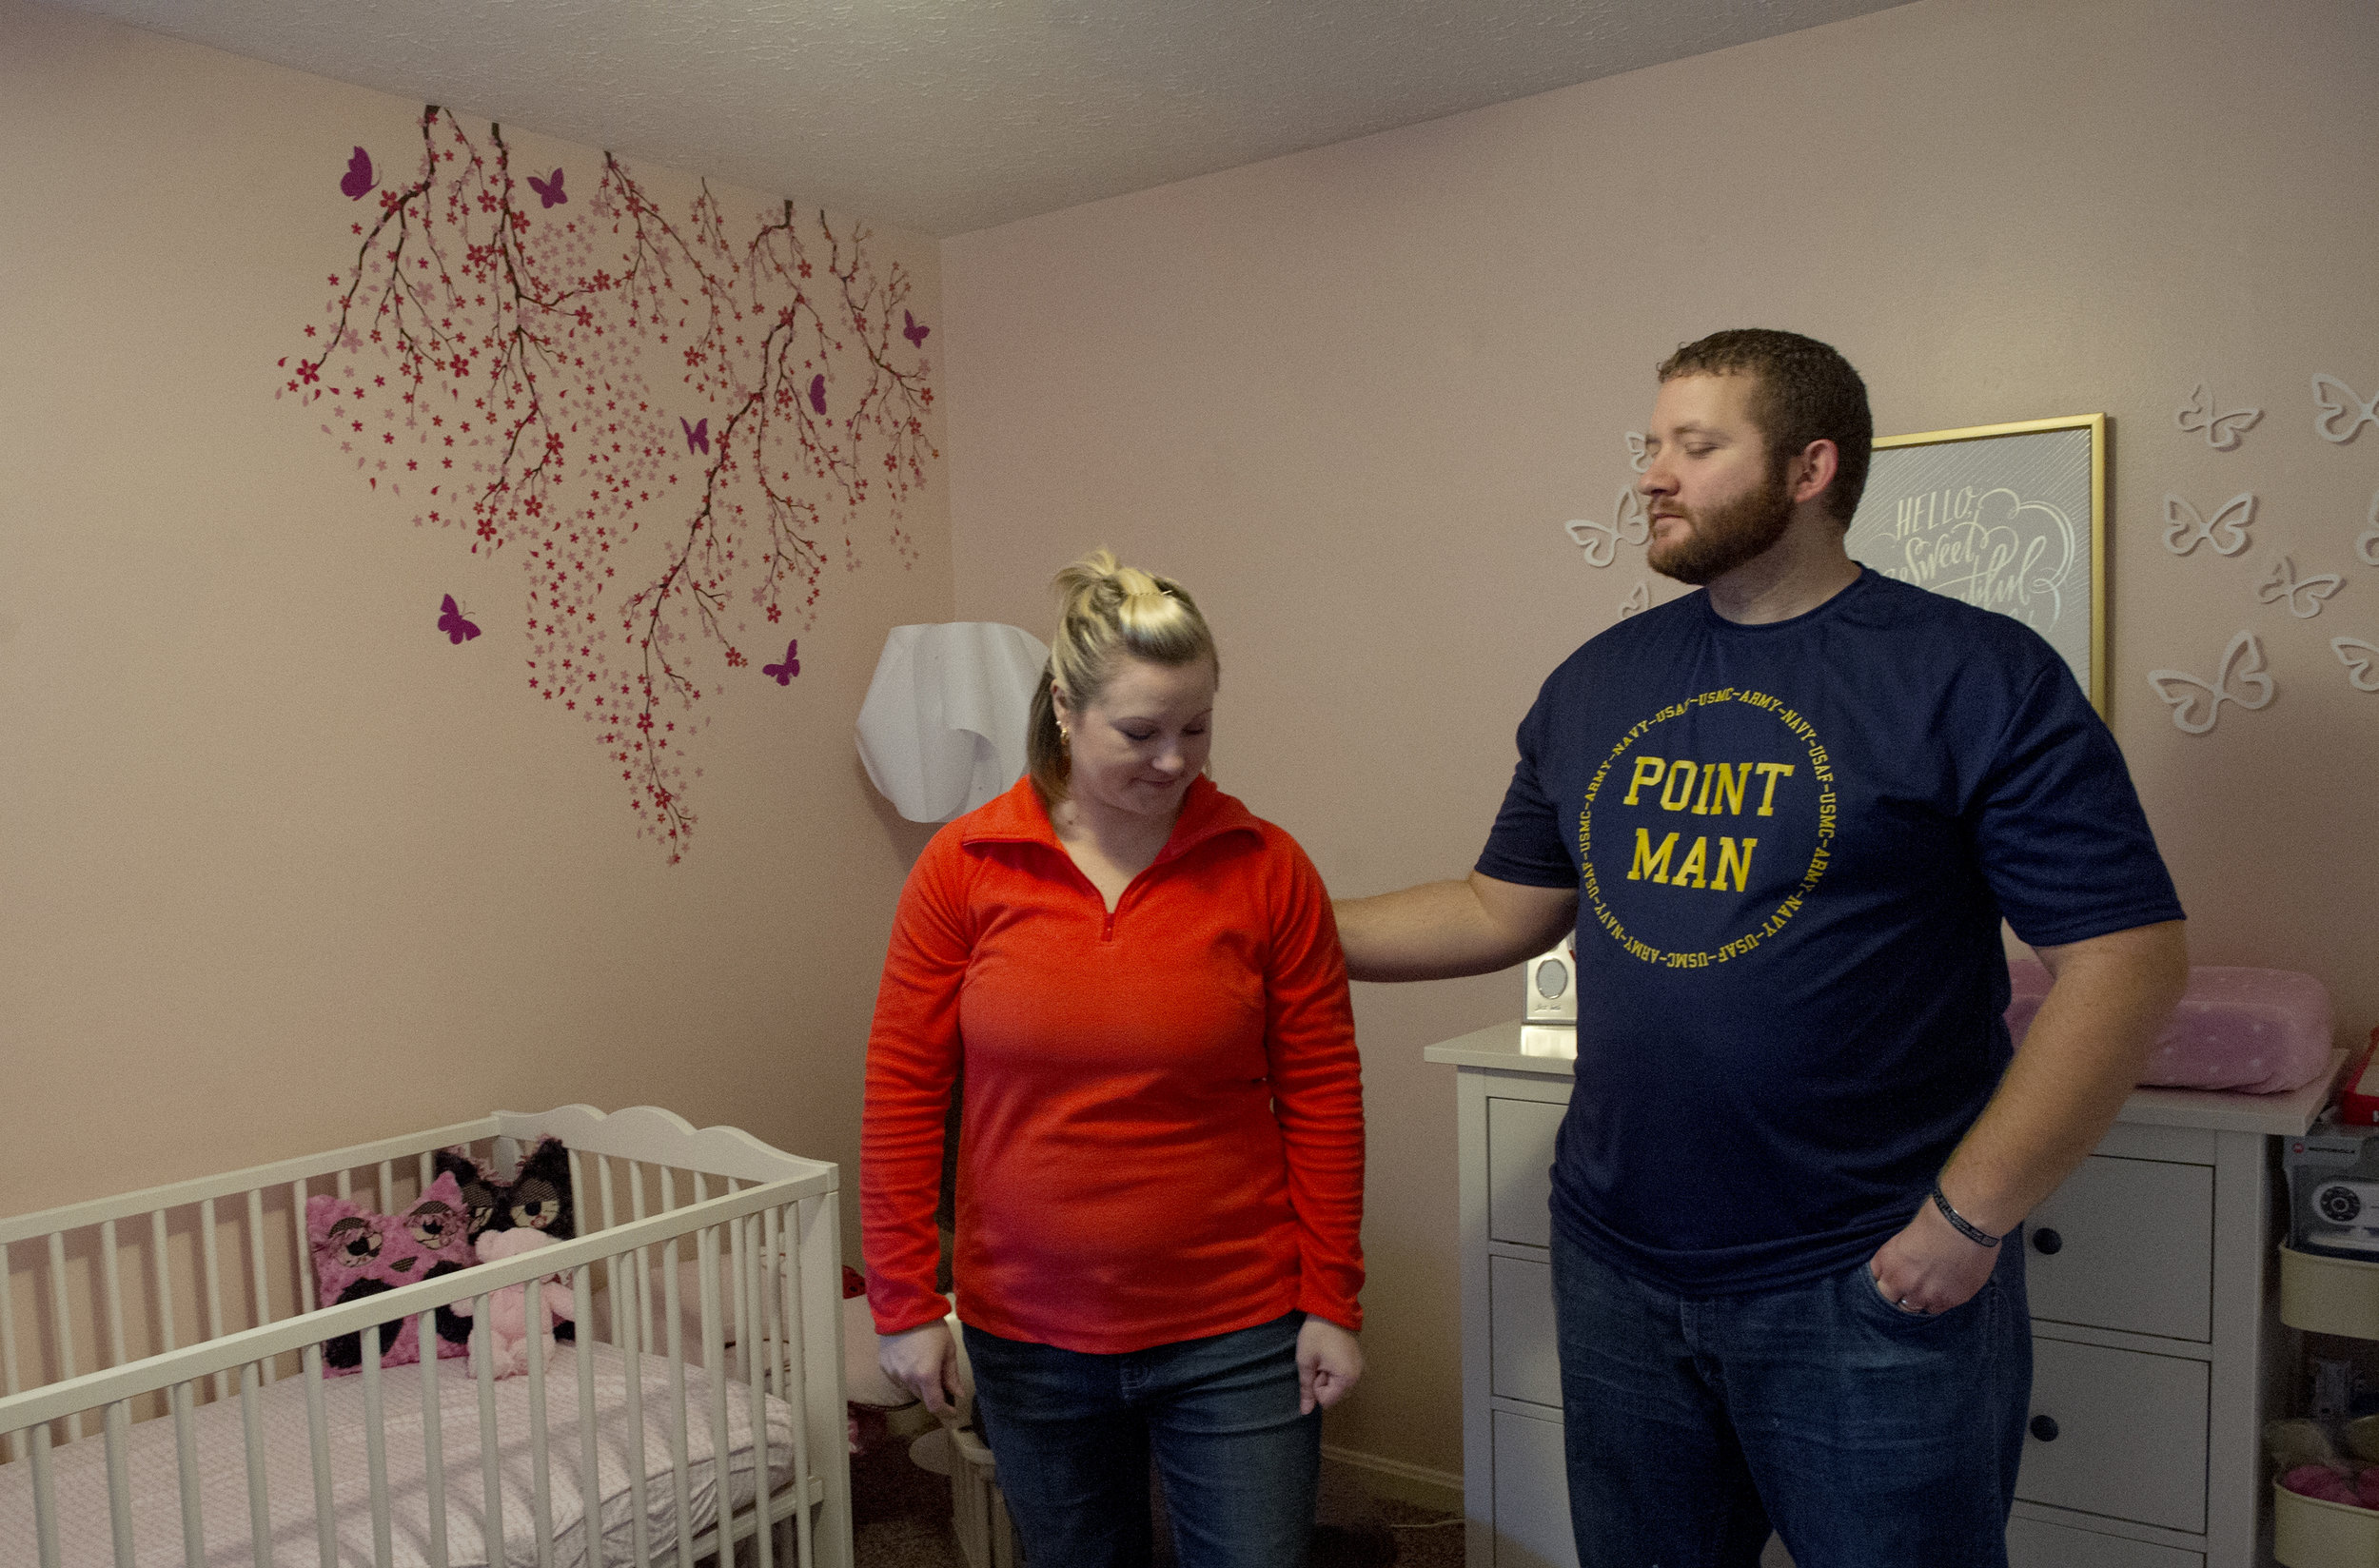  Erickia and Michael put the finishing touches on Gracelyn's room during the final weeks of Angelica's pregnancy at their home in Evansville Sunday Nov. 9, 2014. "Everyone we know knew for the longest time we were trying to have a child," Michael des